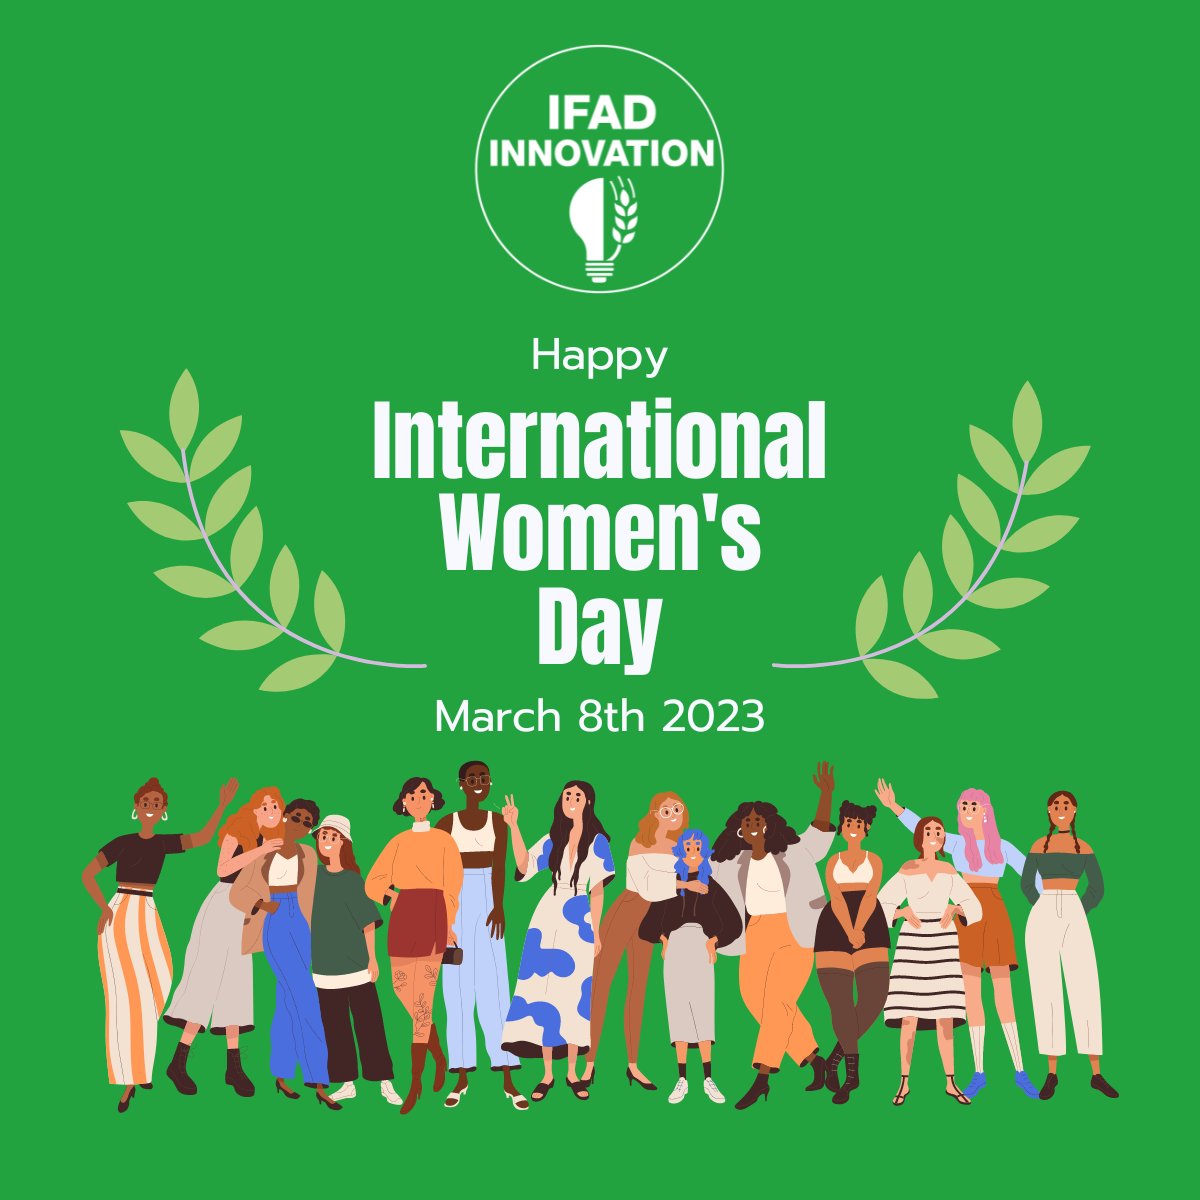 Wishing all my female friends & colleagues and the men that work towards #genderequality a very happy International Women's Day! Let’s all contribute to bridge the #gendergap and support #women and #girls in achieving their full #potential and #agency. #IWD2023 #IFADInnovation